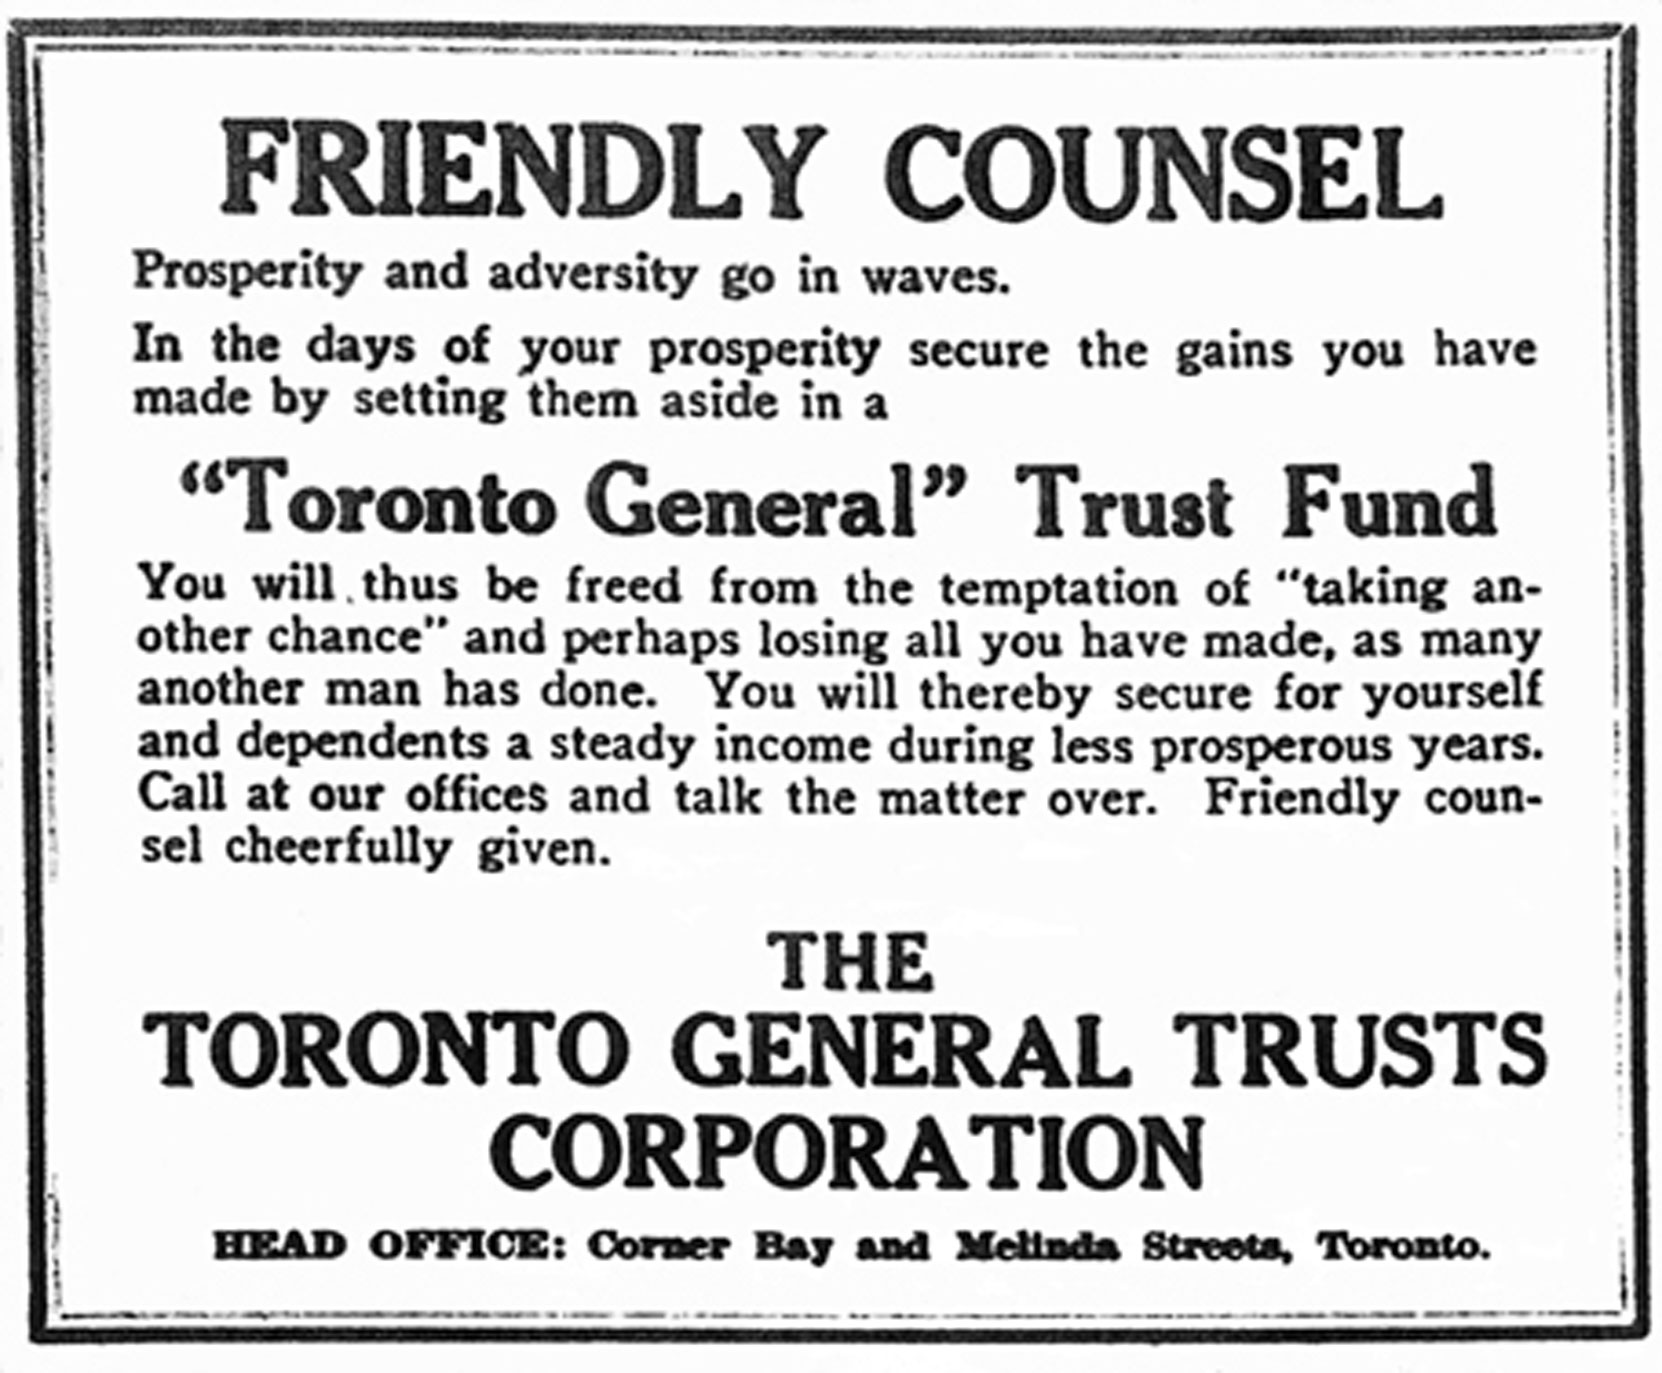 1920 advertisement for the Toronto General Trusts Corporation. Robert Butchart served on the company's B.C. Advisory Board. (Author's collection)